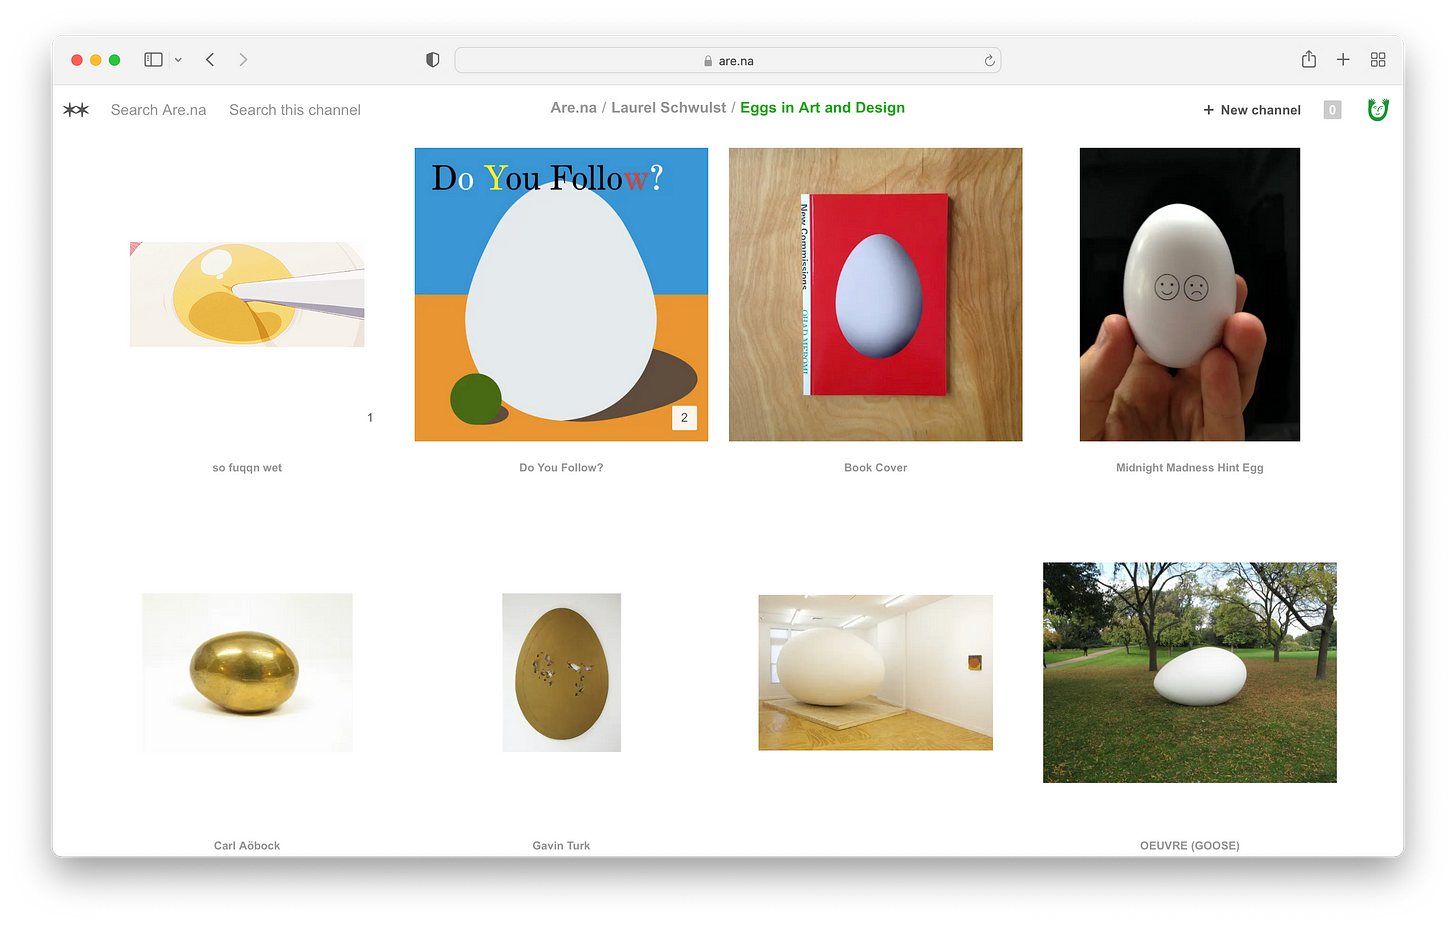 Laurel Schwulst’s [“Eggs in Art & Design”] (https://www.are.na/laurel-schwulst/eggs-in-art-and-design) Are.na Channel, 2014 – ongoing. [An Are.na channel with many pictures of eggs in various contexts and materials.] 